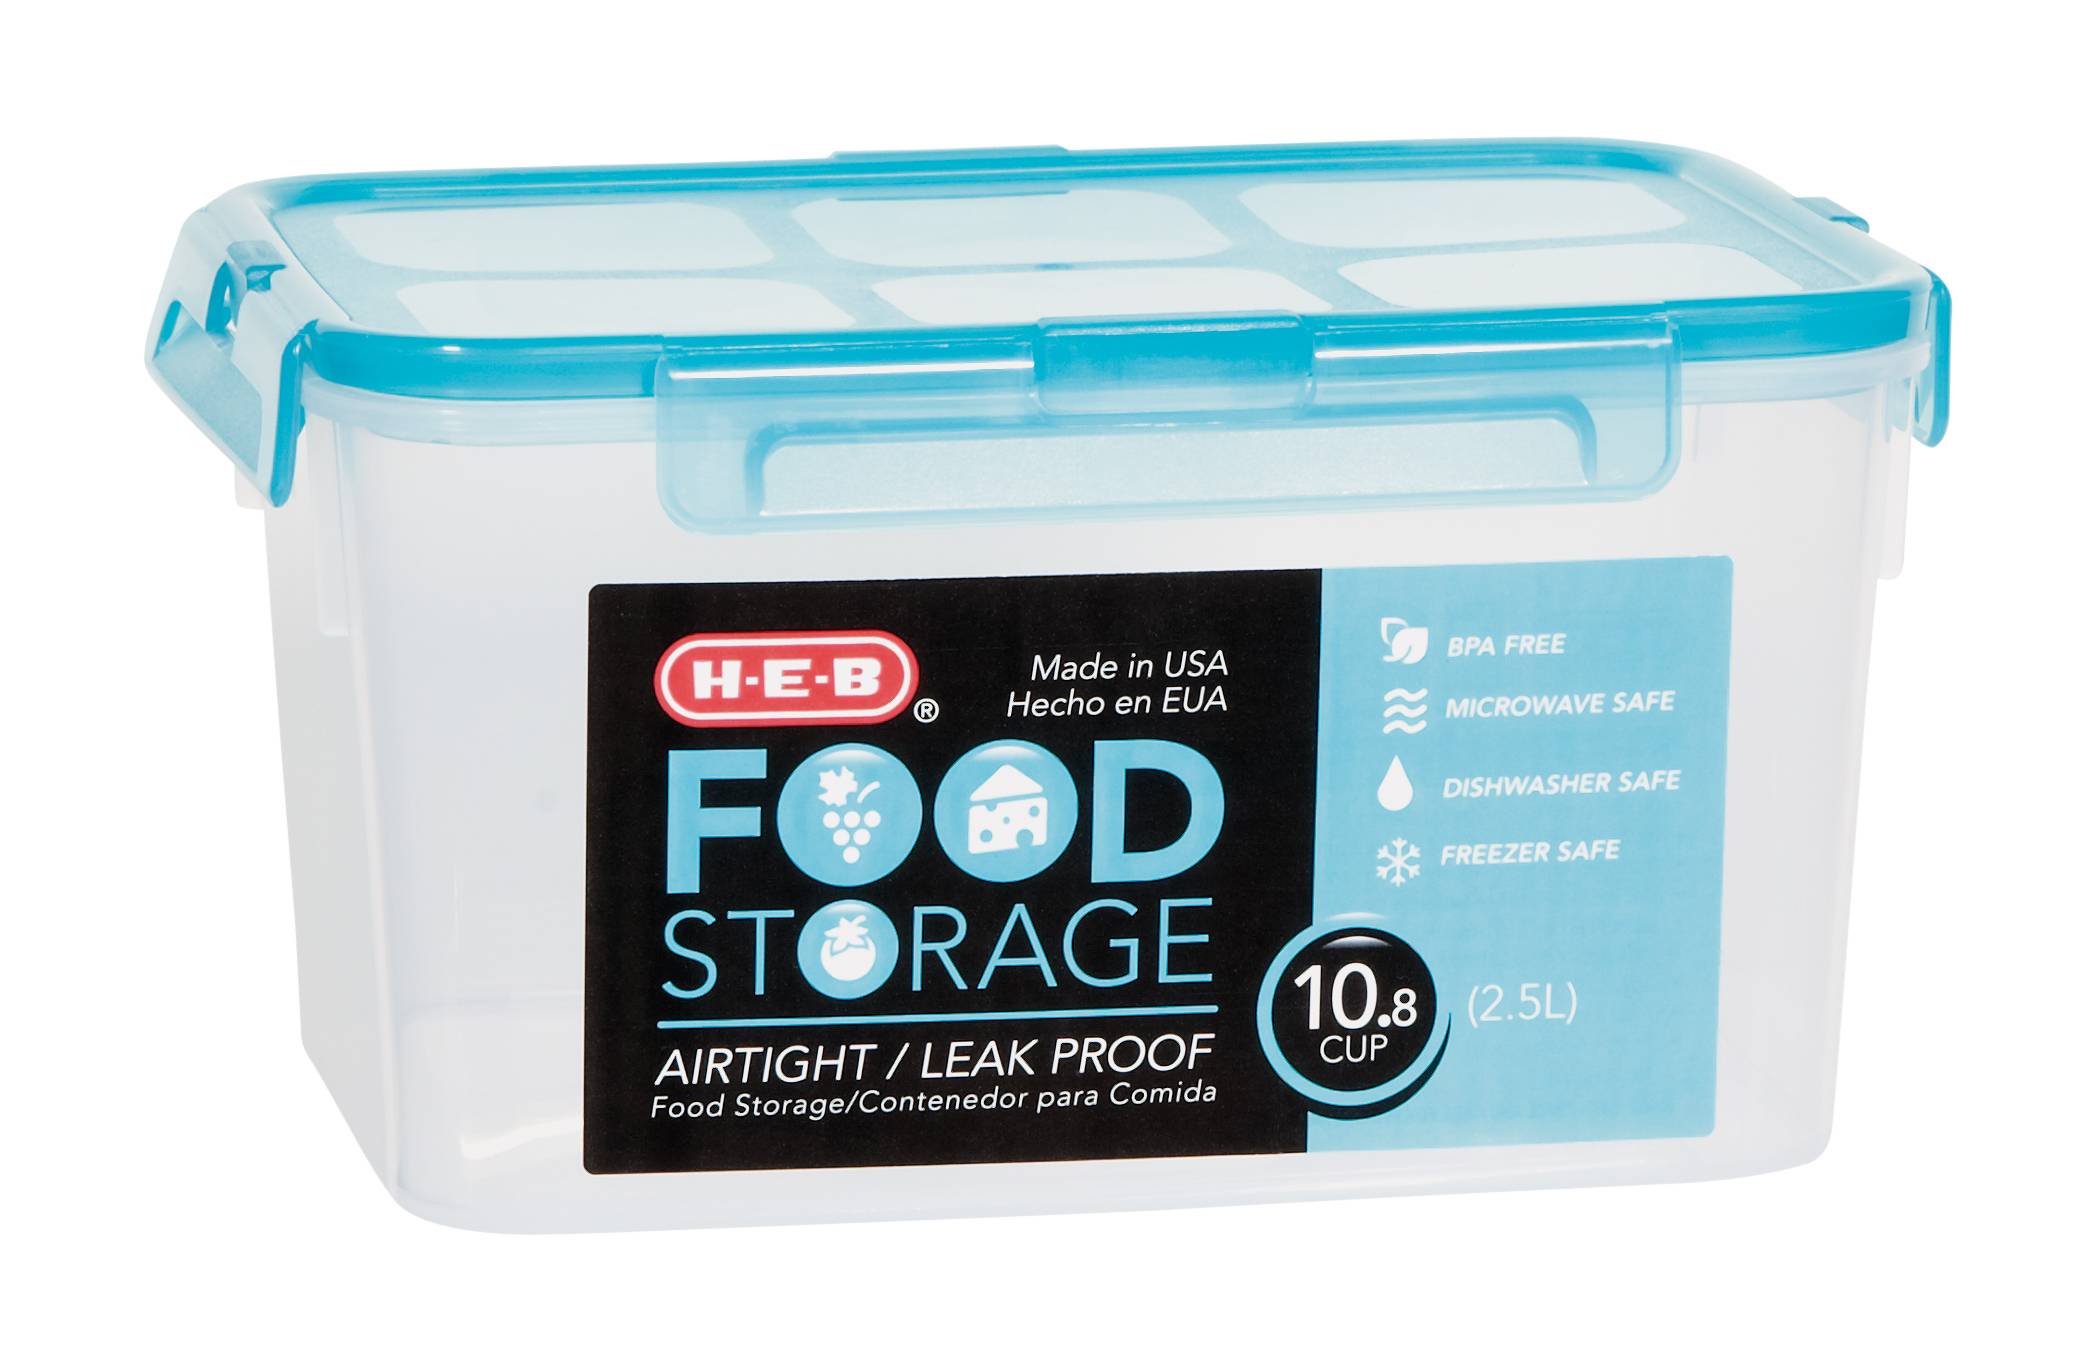 H-E-B 10.8 Cup Airtight Leak Proof Food Storage Container with